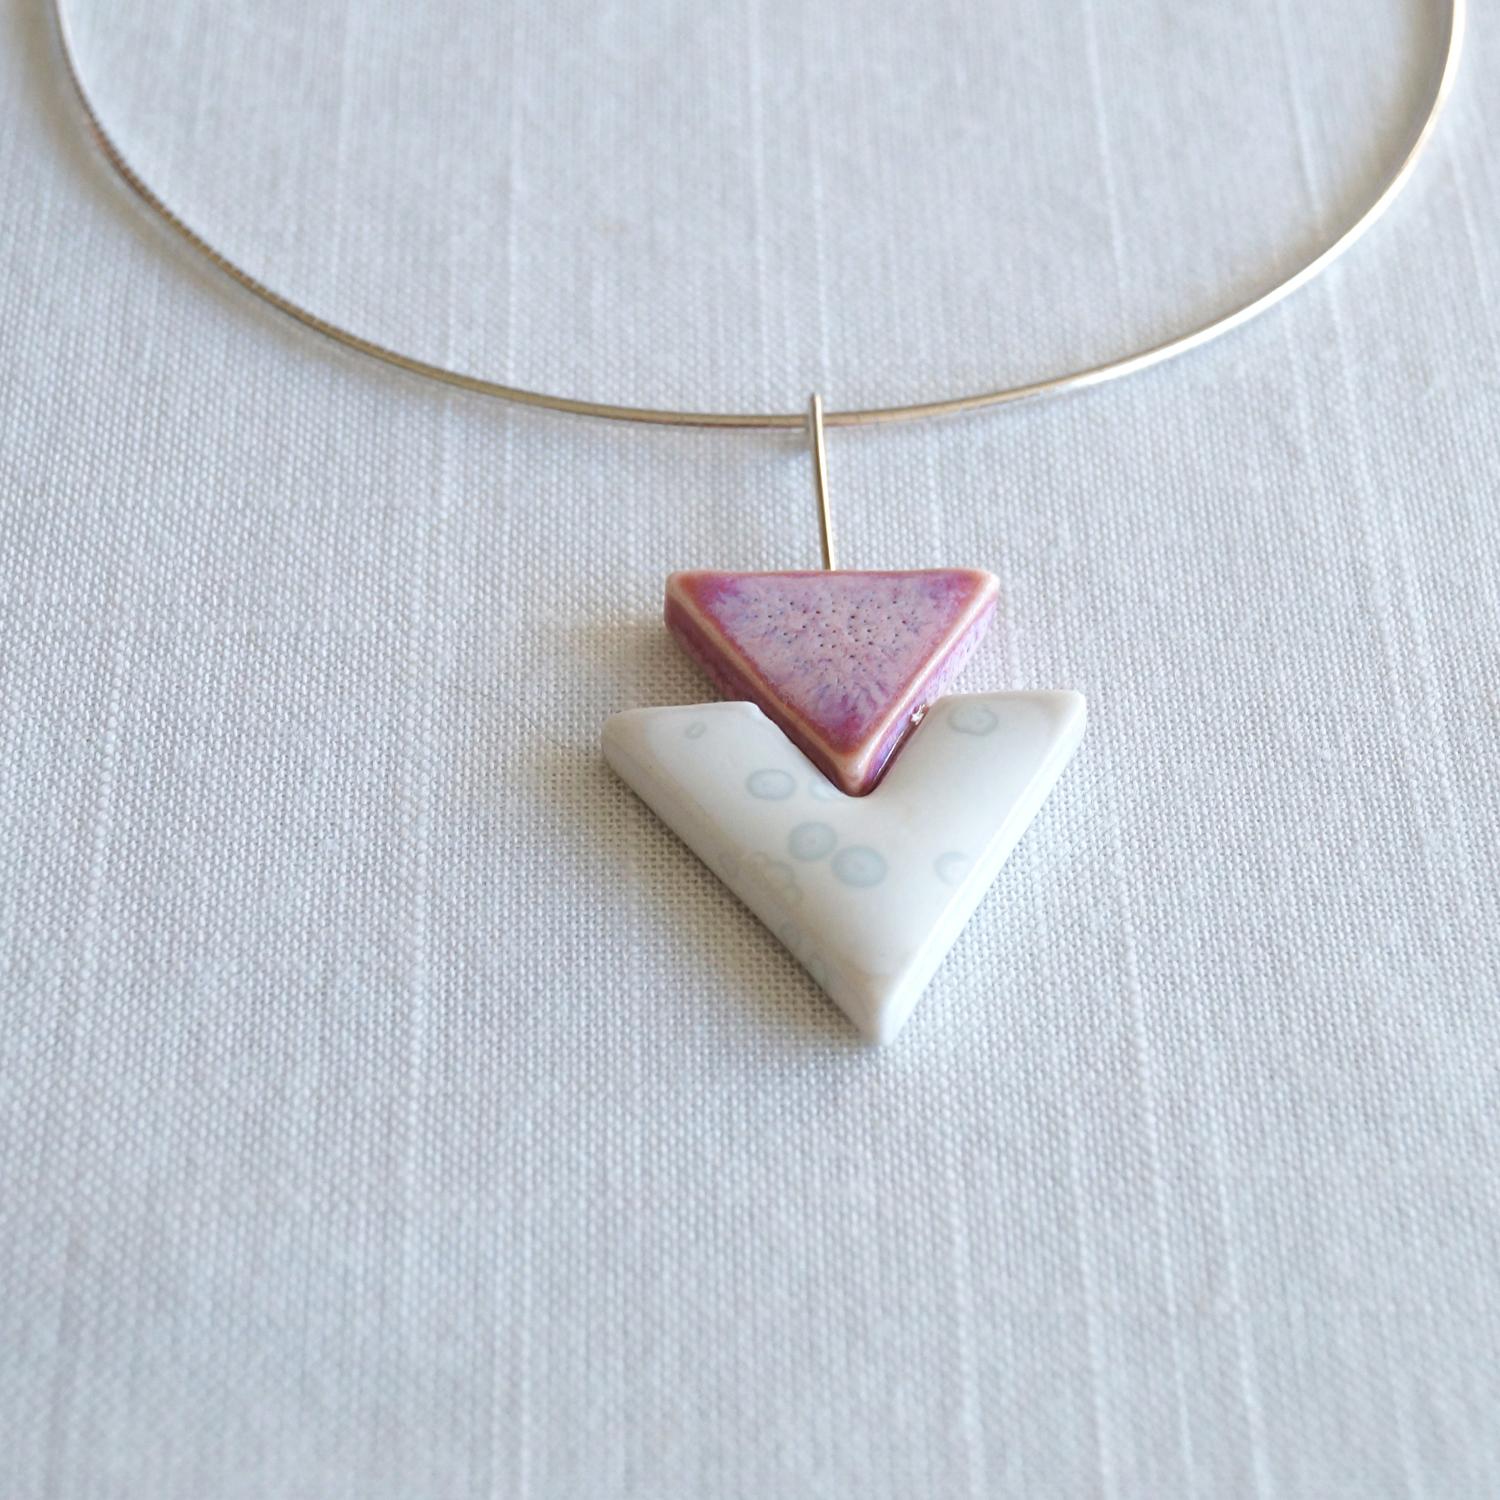 ARROW porcelain omega necklace, pink white porcelain, geometric necklace, geo necklace, triangle necklace, 11th anniversary, rose gold, stainless steel omega necklet, 925 sterling silver, hallmarked silver necklet, 11th anniversary gift, UK, 18th wedding anniversary gift, hand made porcelain gift, gift for her,  